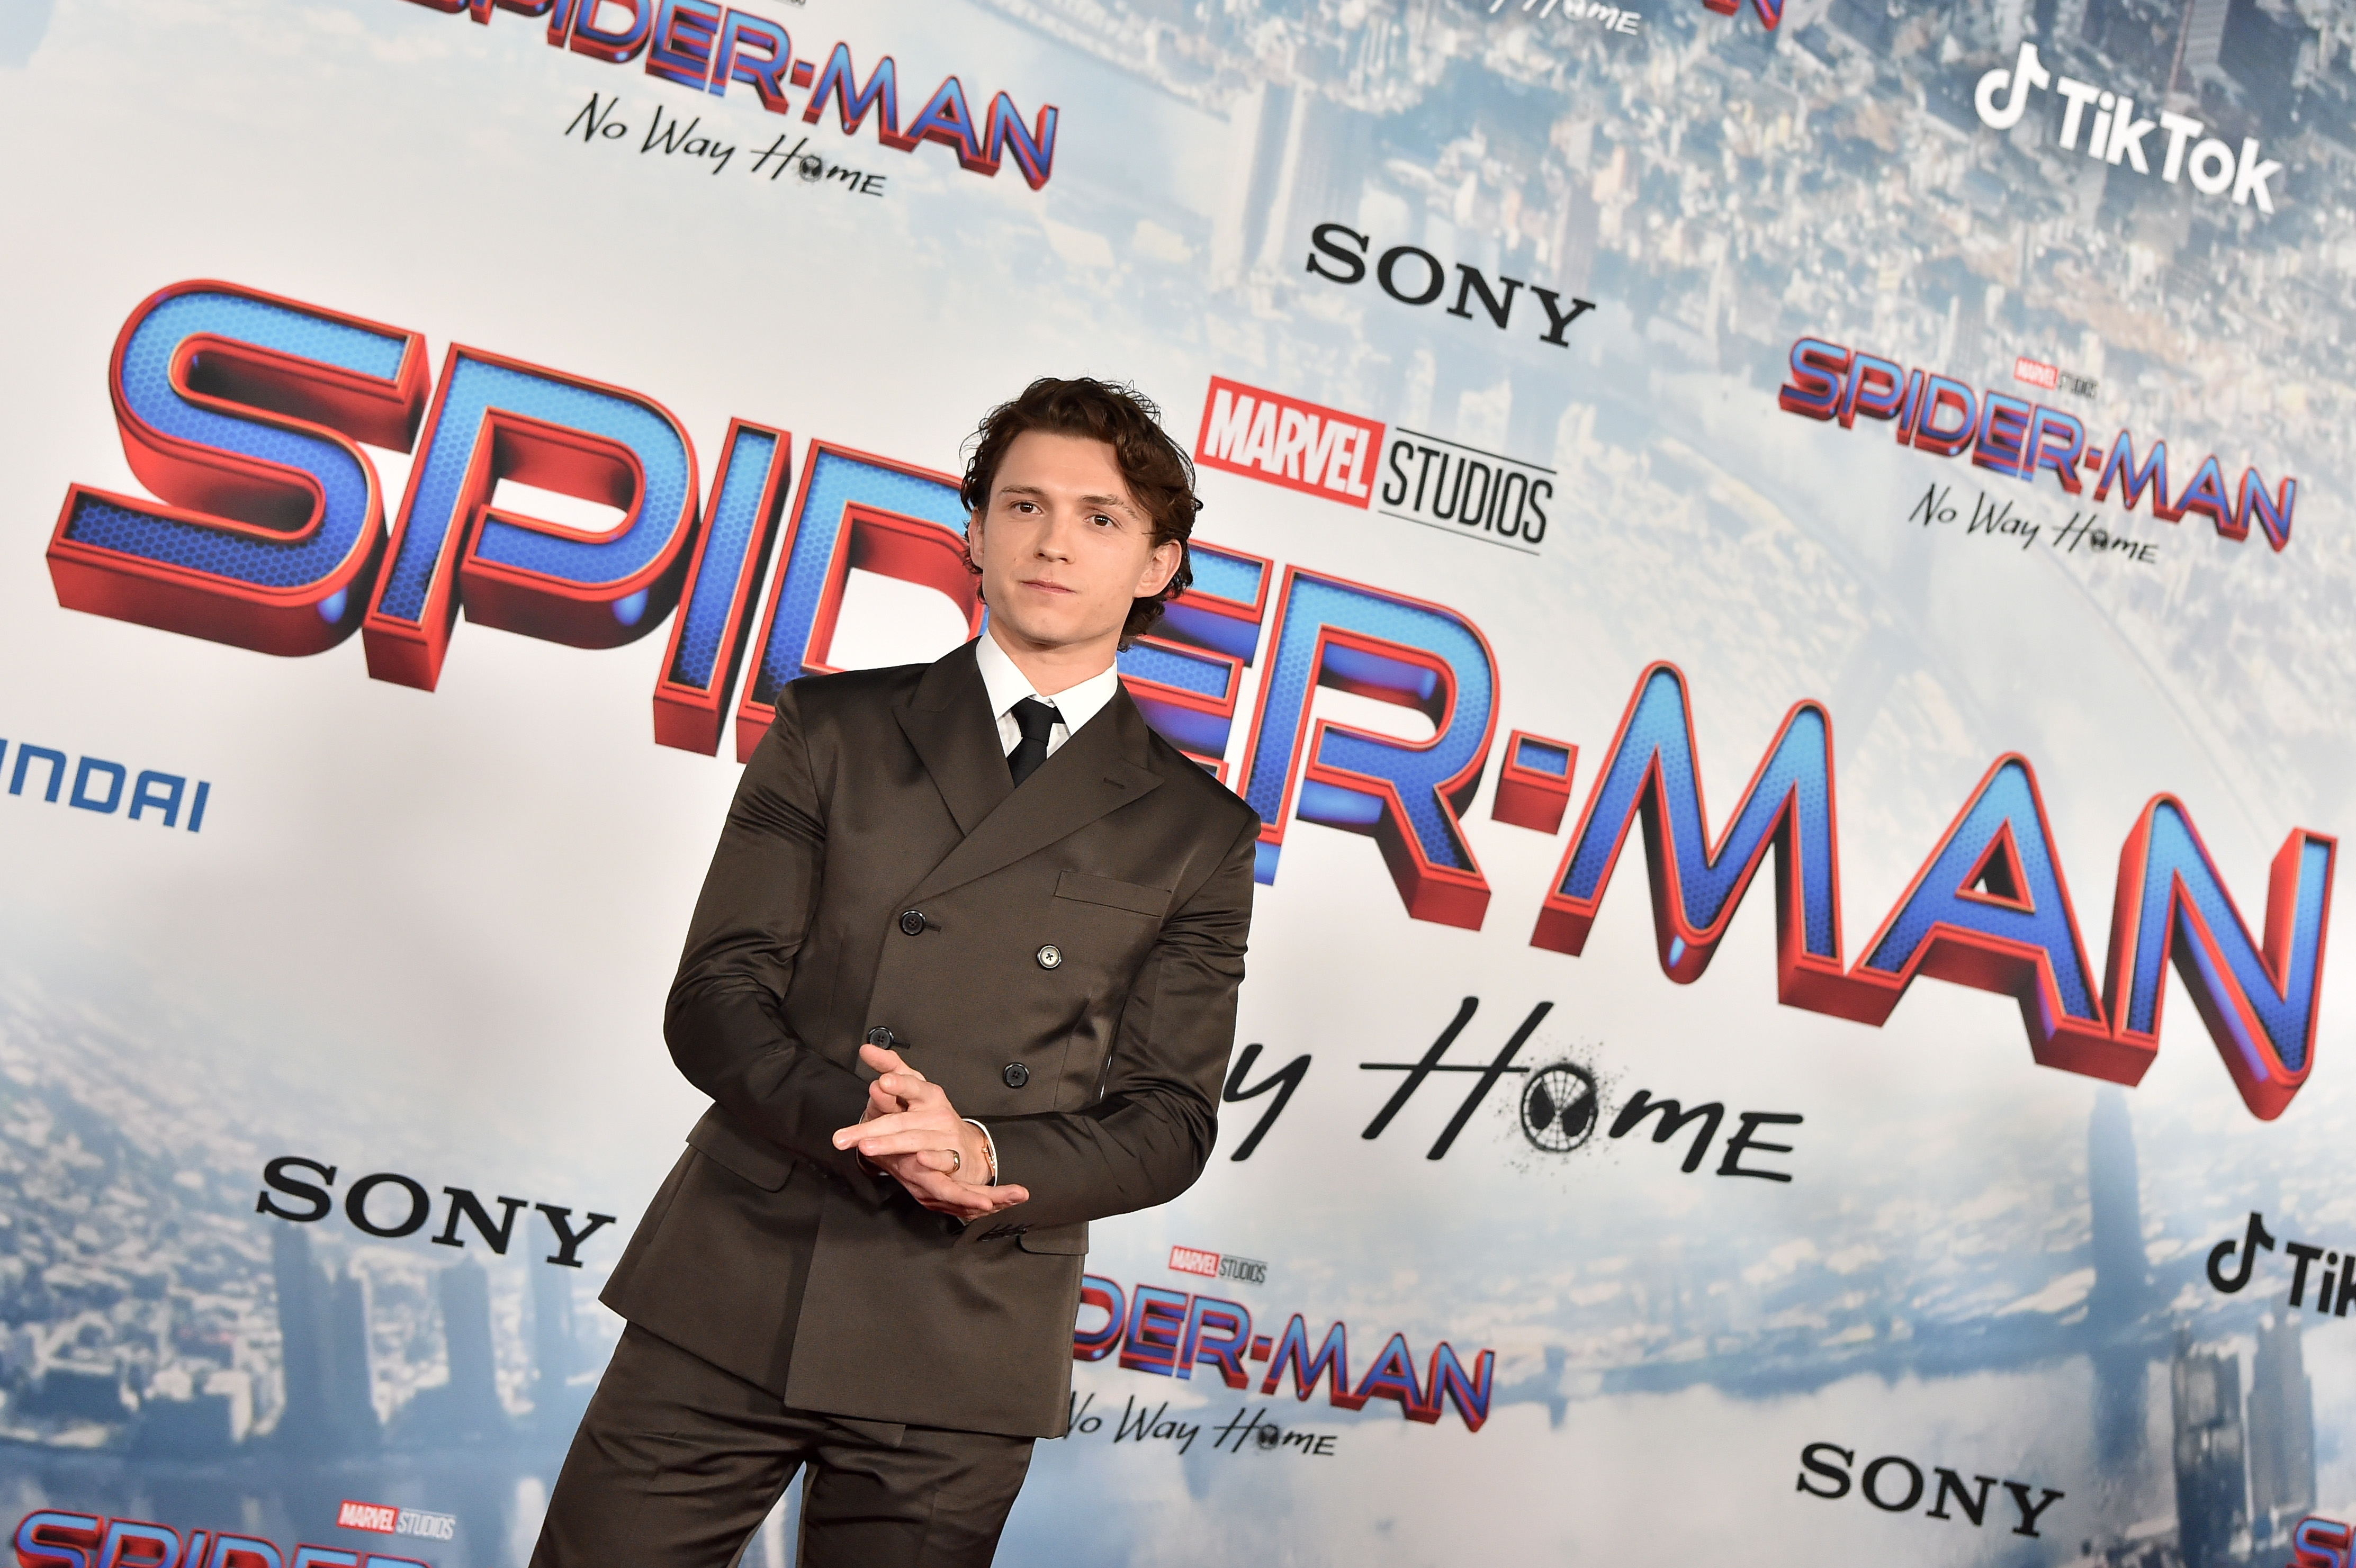 'Spider-Man: No Way Home,' which contains multiple Easter eggs, star Tom Holland wears a dark gray suit over a white button-up shirt and black tie.